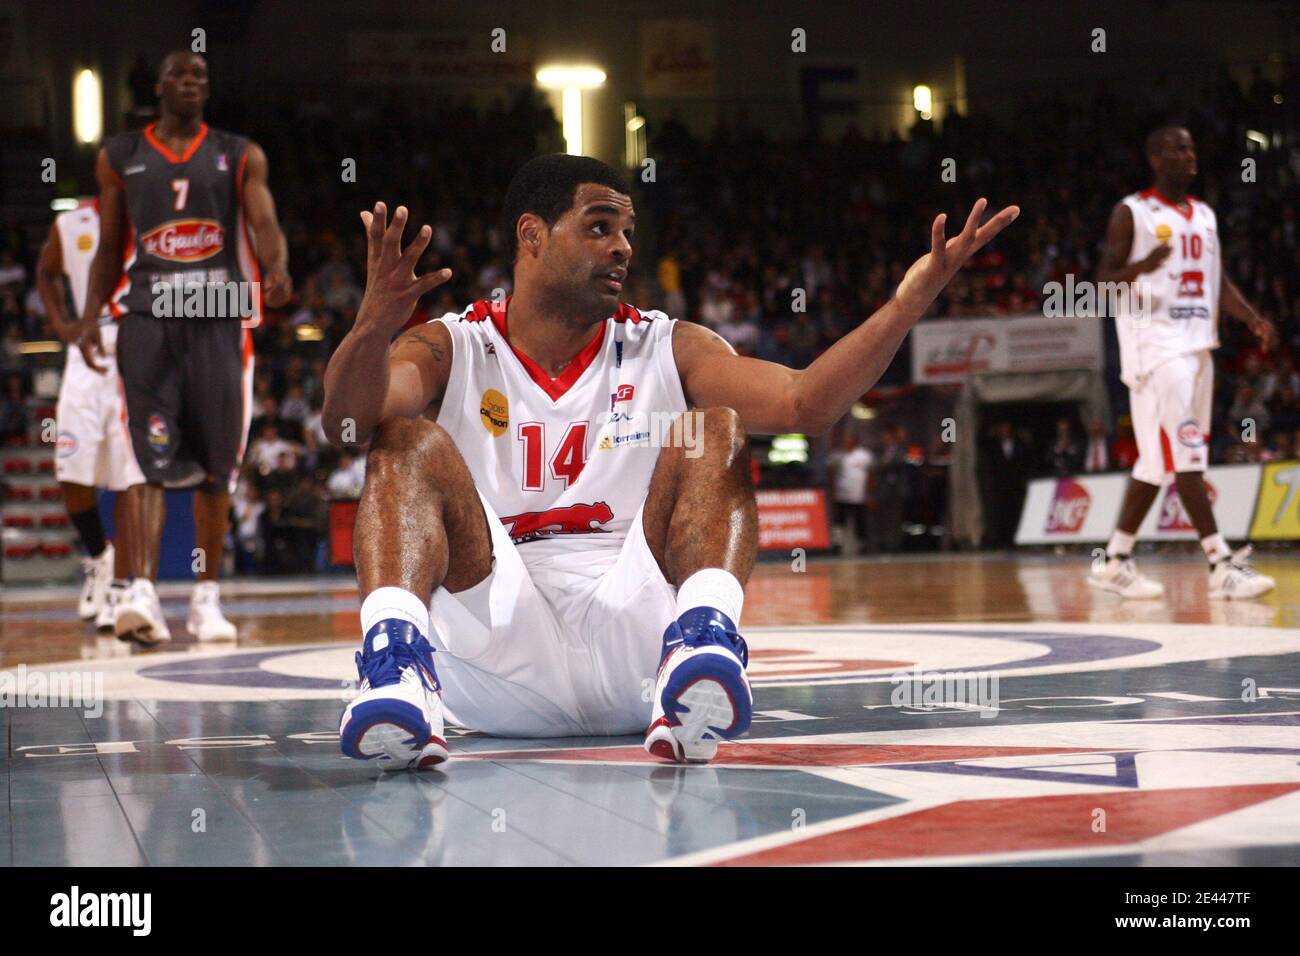 Nancy's Ricardo Greer during the French Pro A basketball match, SLUC Nancy  vs MSB Le Mans at Jean Weille Hall in Nancy, France on on April 24, 2009.  Photo by Mathieu Cugnot/ABACAPRESS.COM